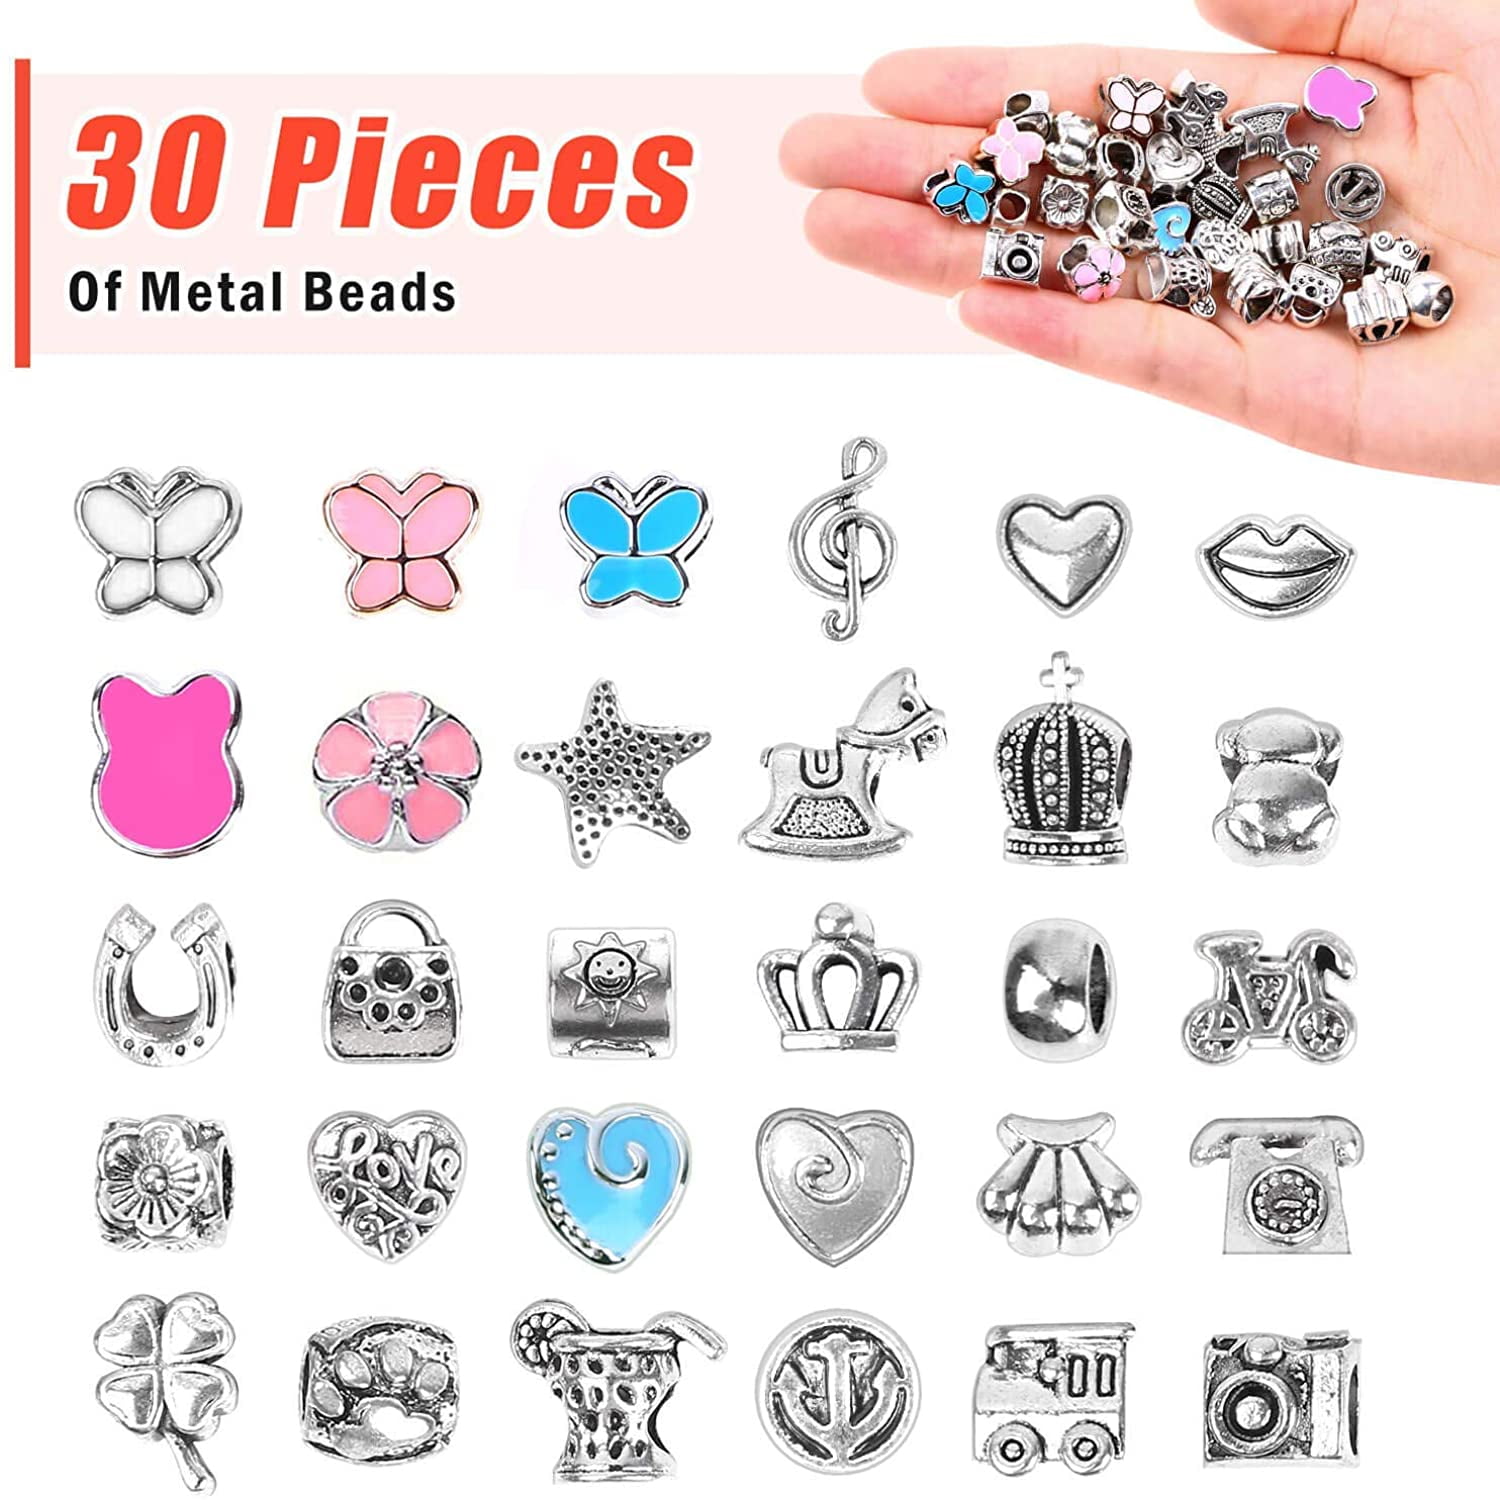 130 Pieces Charm Bracelet Making Kit Including Jewelry Beads Snake Chains,  DIY Craft for Girls, Jewelry Christmas Gift Set for Arts and Crafts for